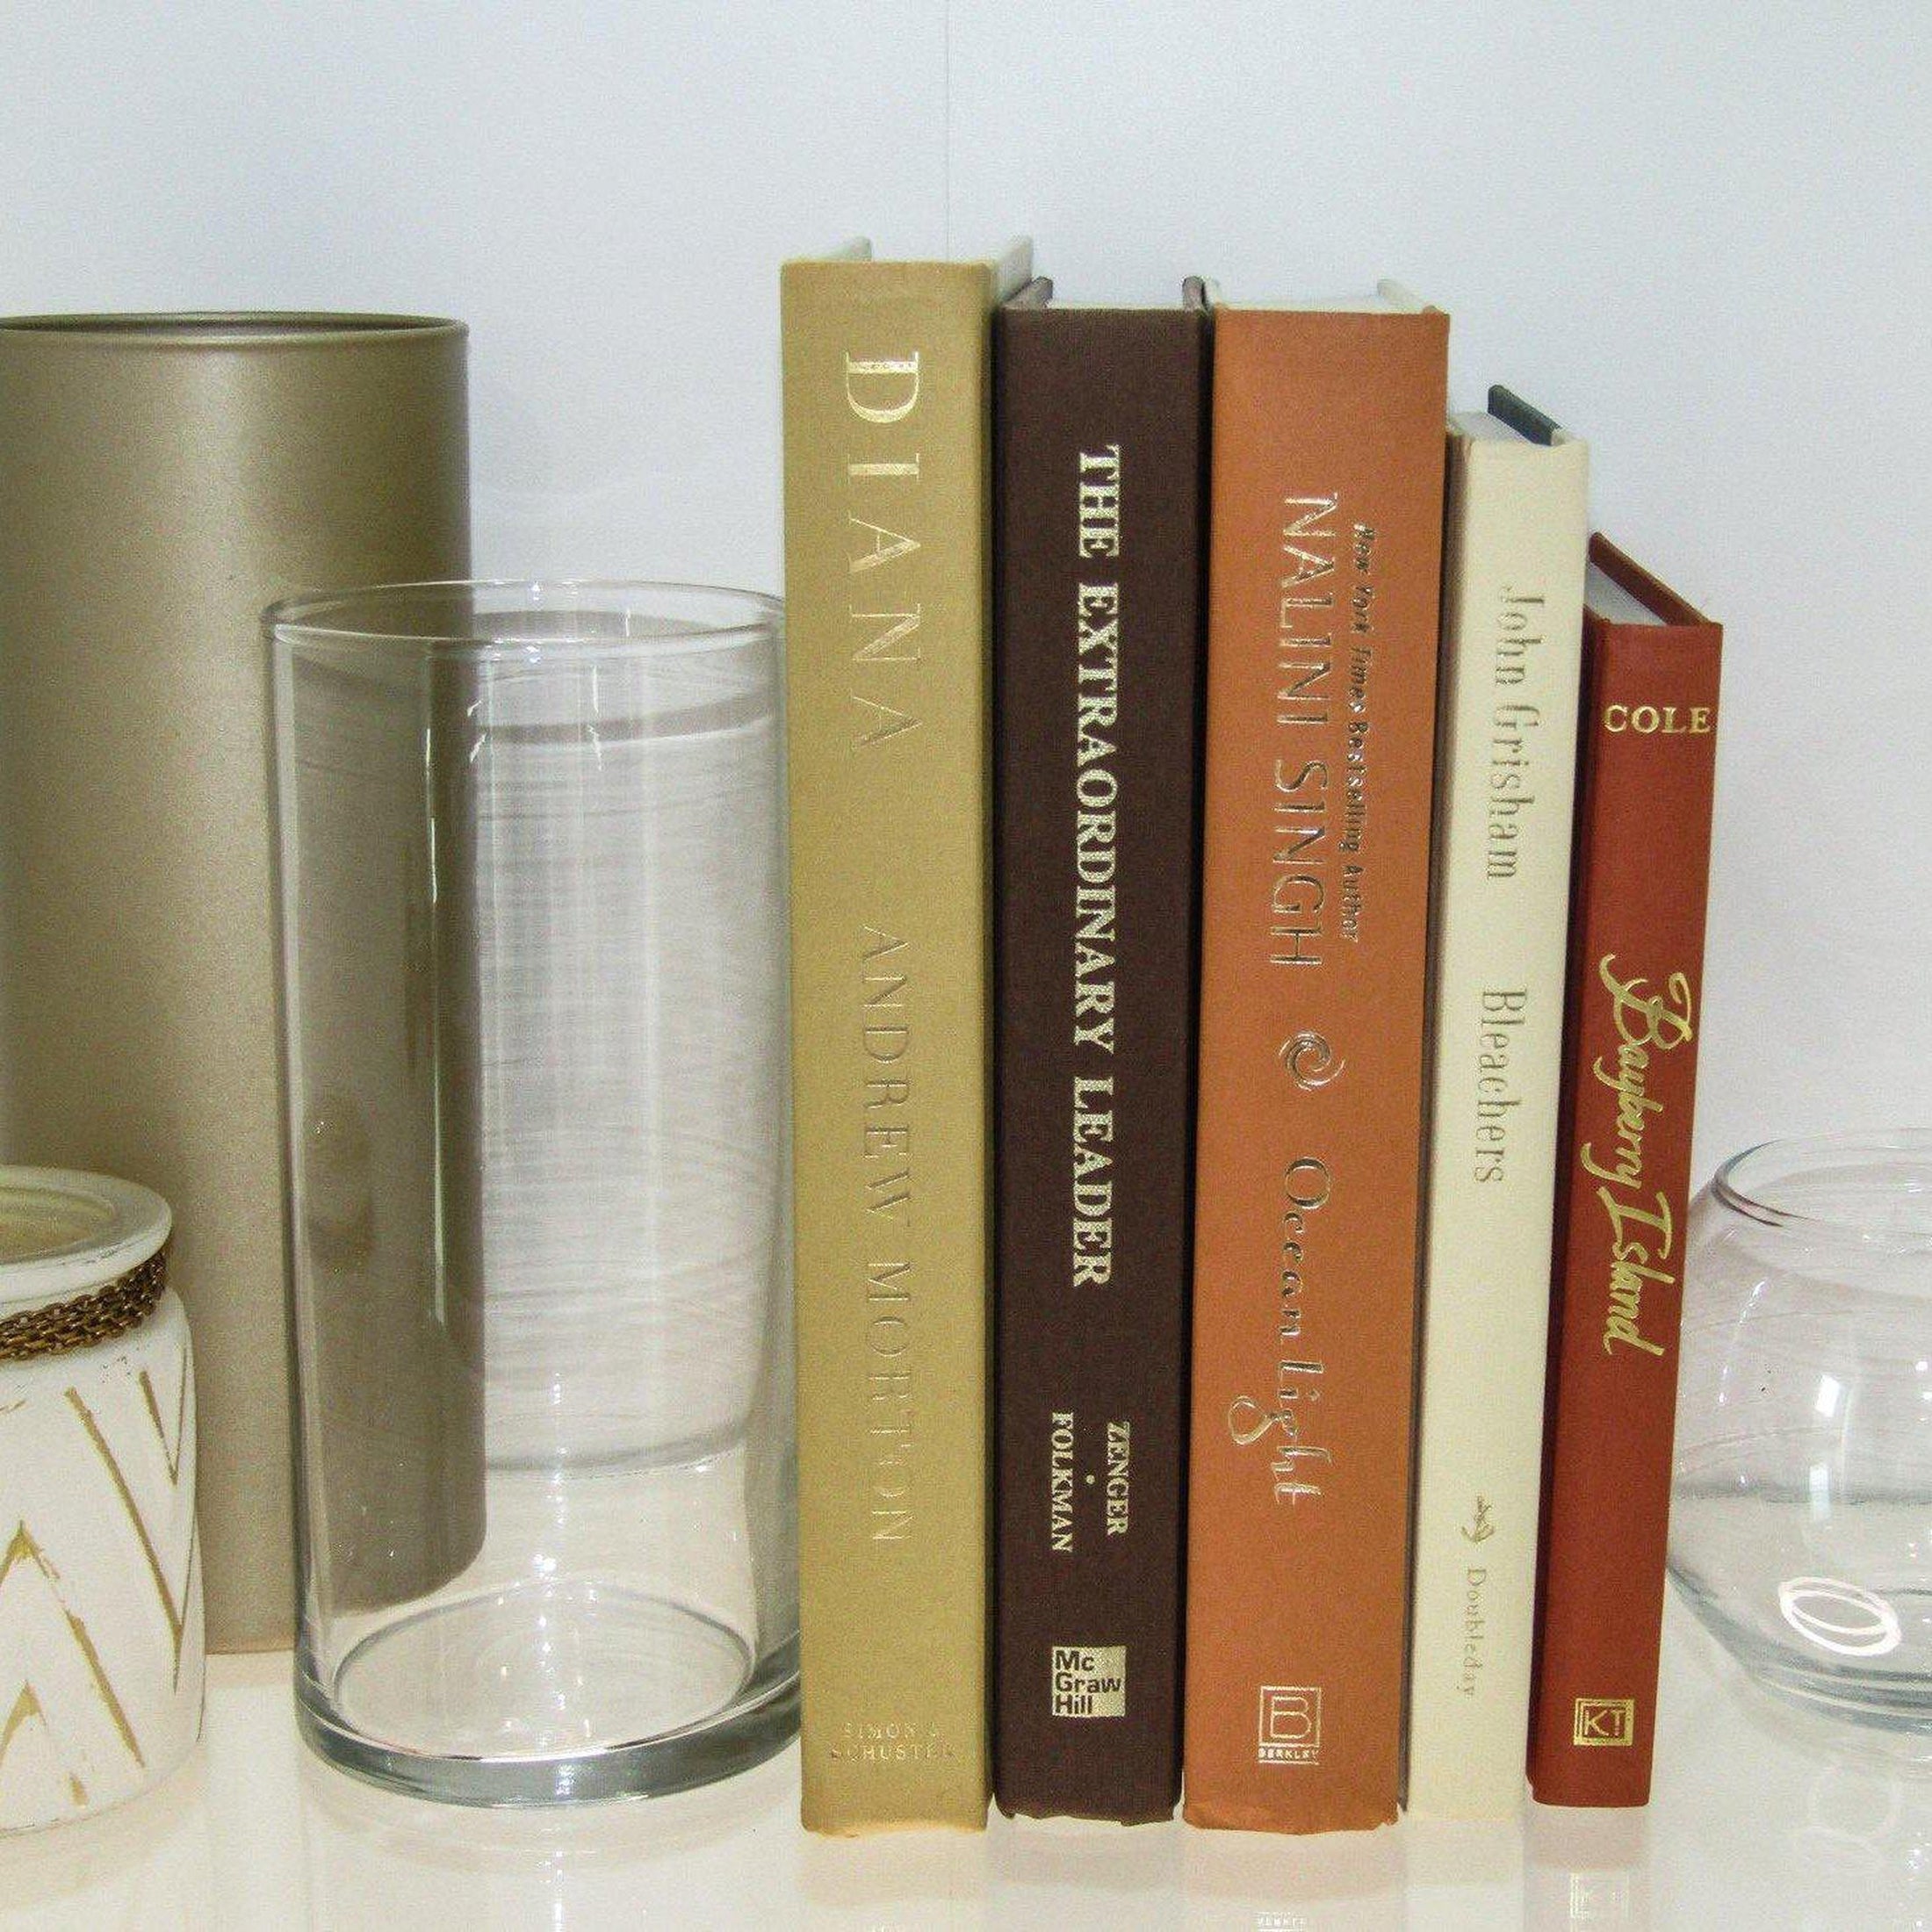 Natural Luxury Collection 9 | Book Stack, Vases & Candle Holder-Set of Decorative Books and Accents-[stack of real books for decorating]-[set of books with decorative accents]